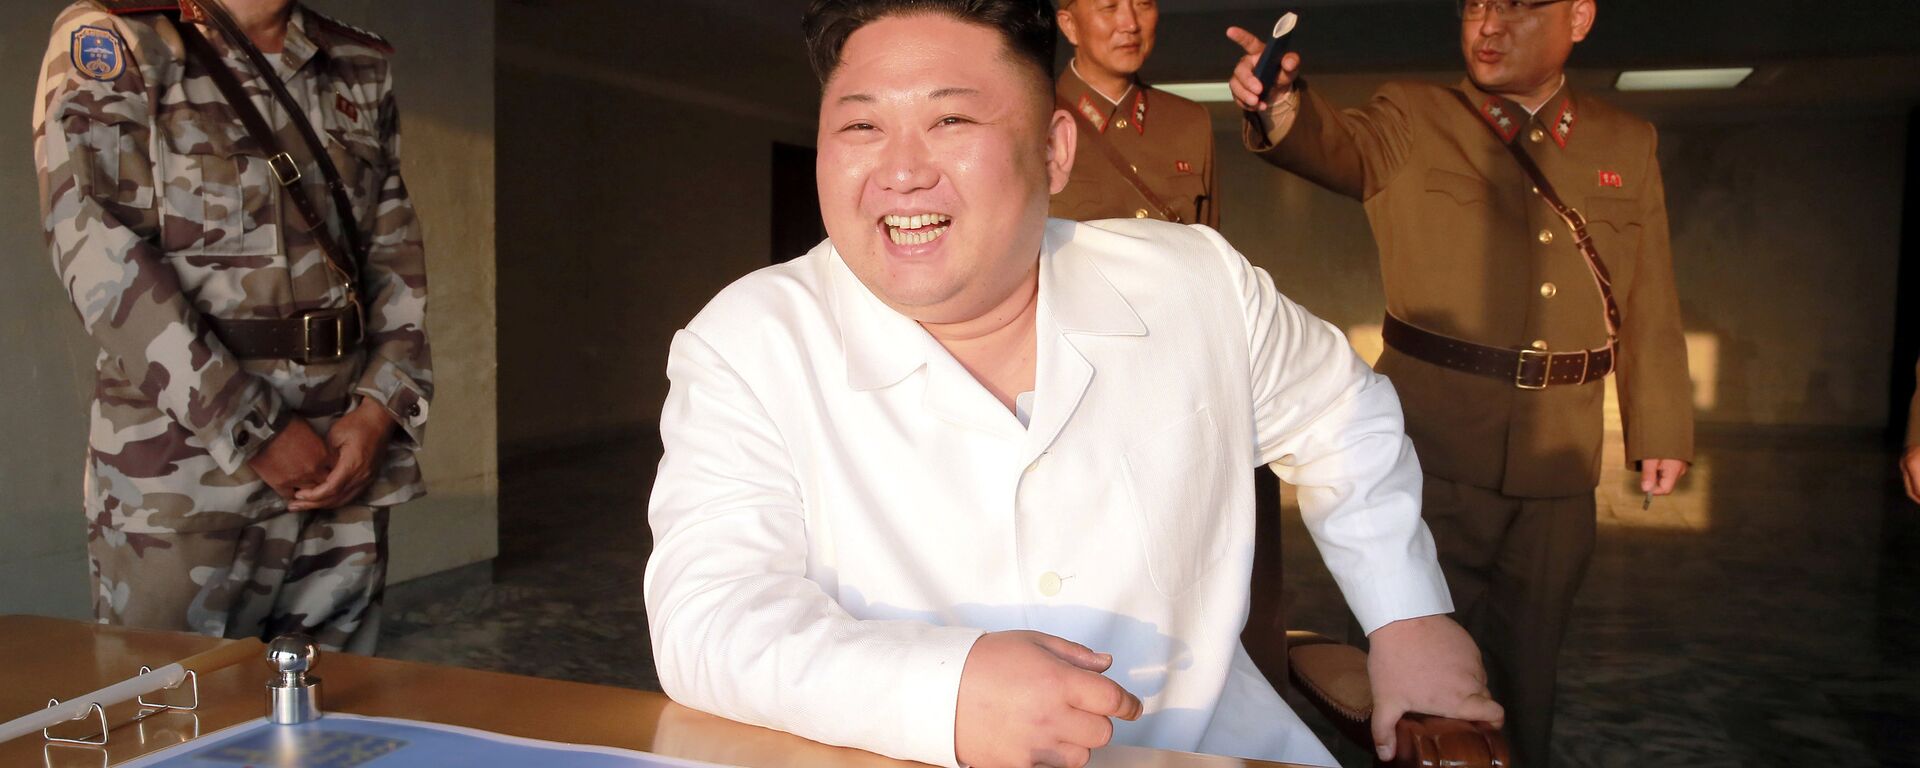 North Korean leader Kim Jong Un reacts during a ballistic rocket test-fire through a precision control guidance system in this undated photo released by North Korea's Korean Central News Agency (KCNA) May 30, 2017 - Sputnik International, 1920, 30.05.2017